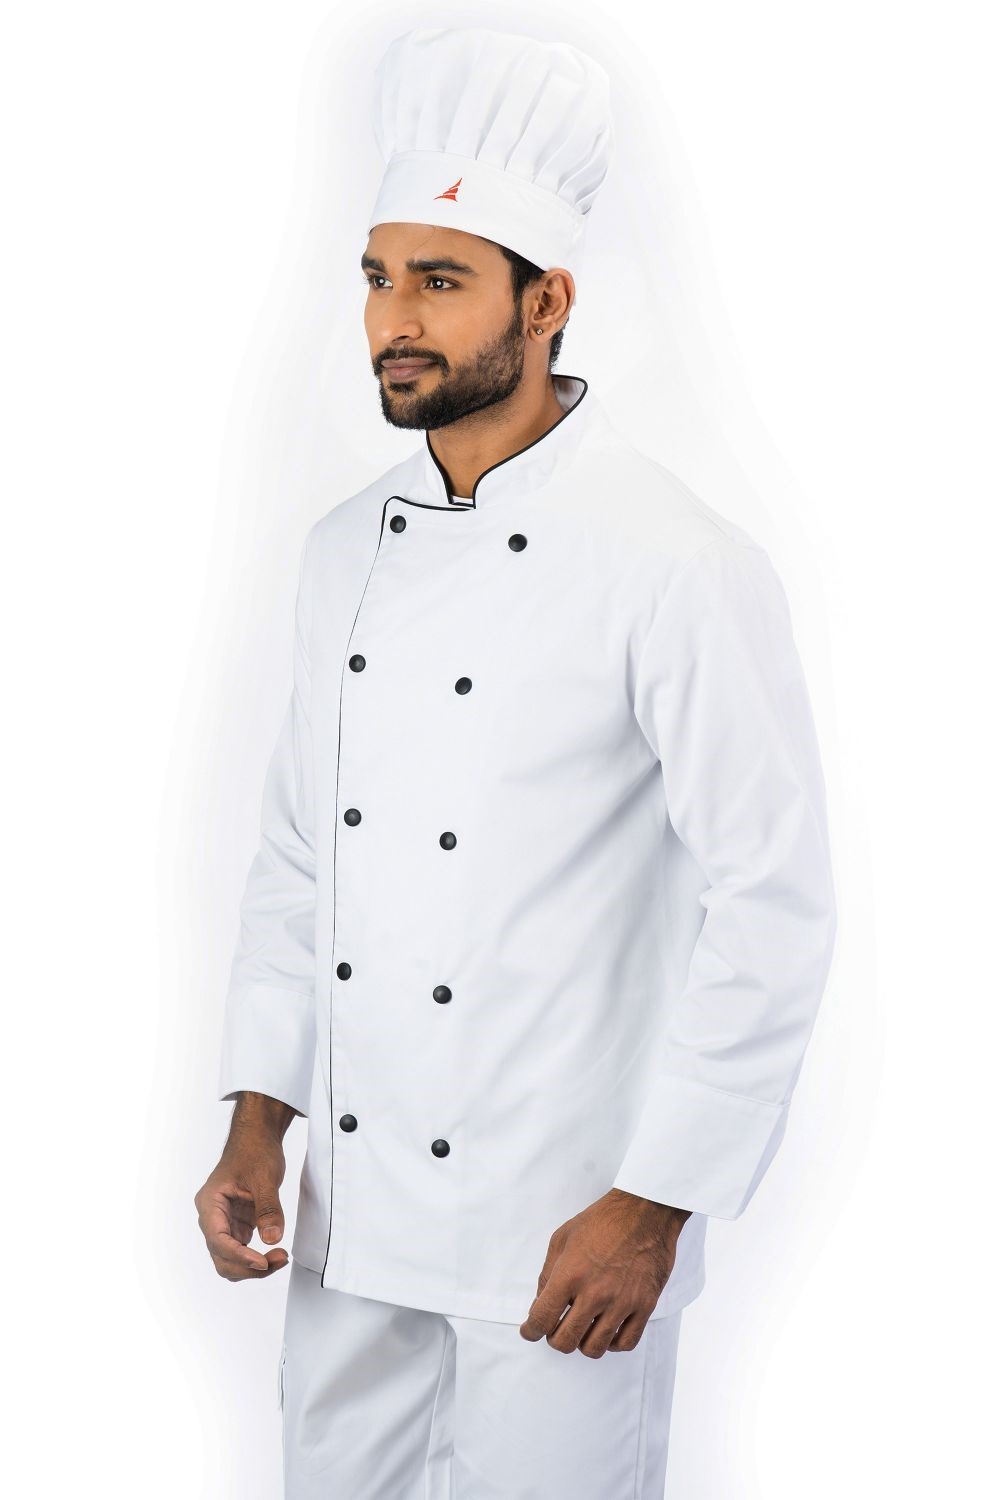 White Chef Coat made of high-quality, soft and comfortable cotton blend fabric which makes you feel more lightweight and comfortable.